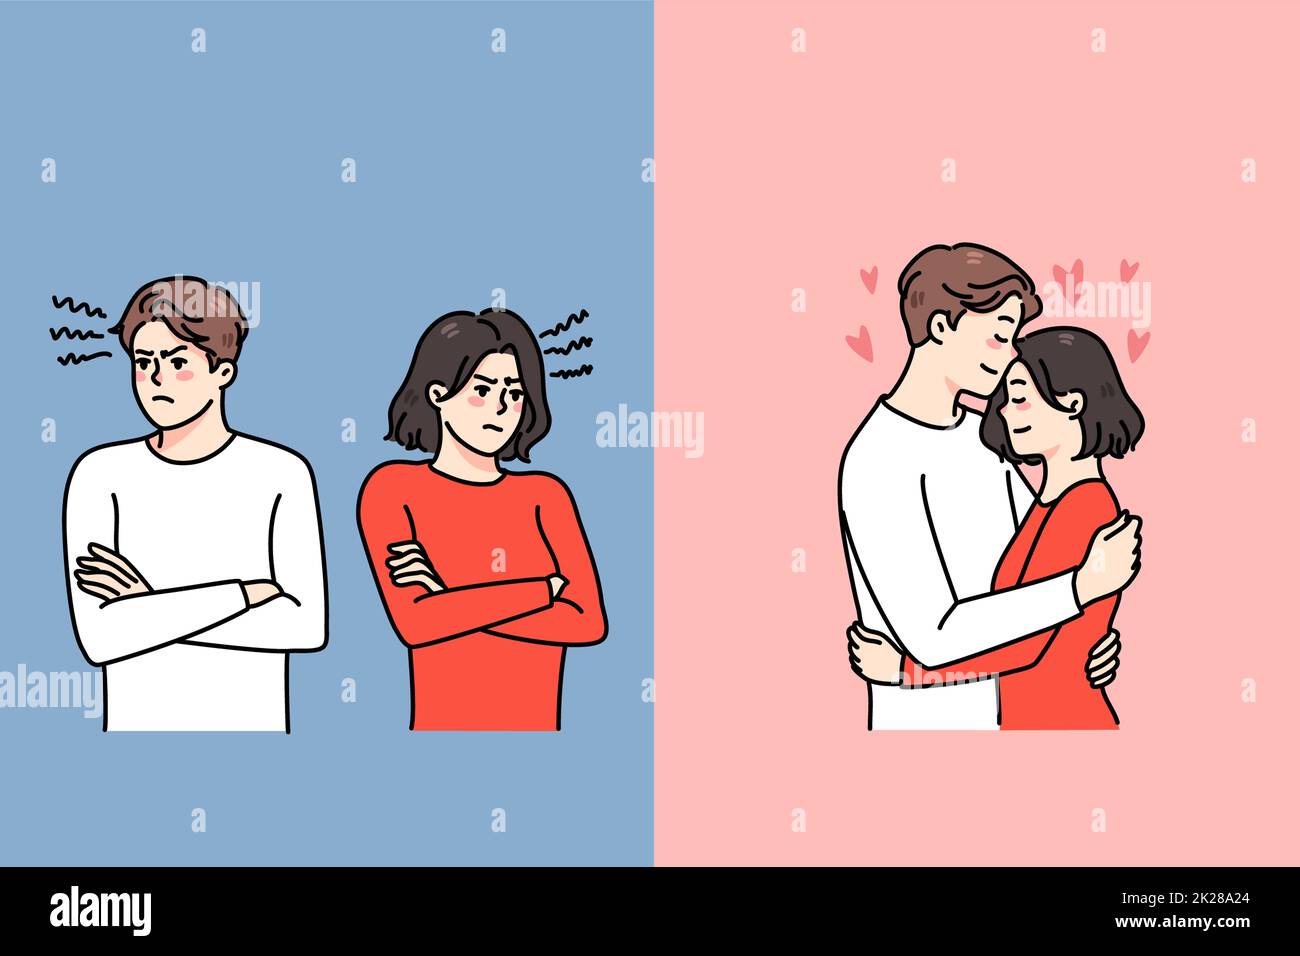 Couple fight and love relationship problems Stock Photo